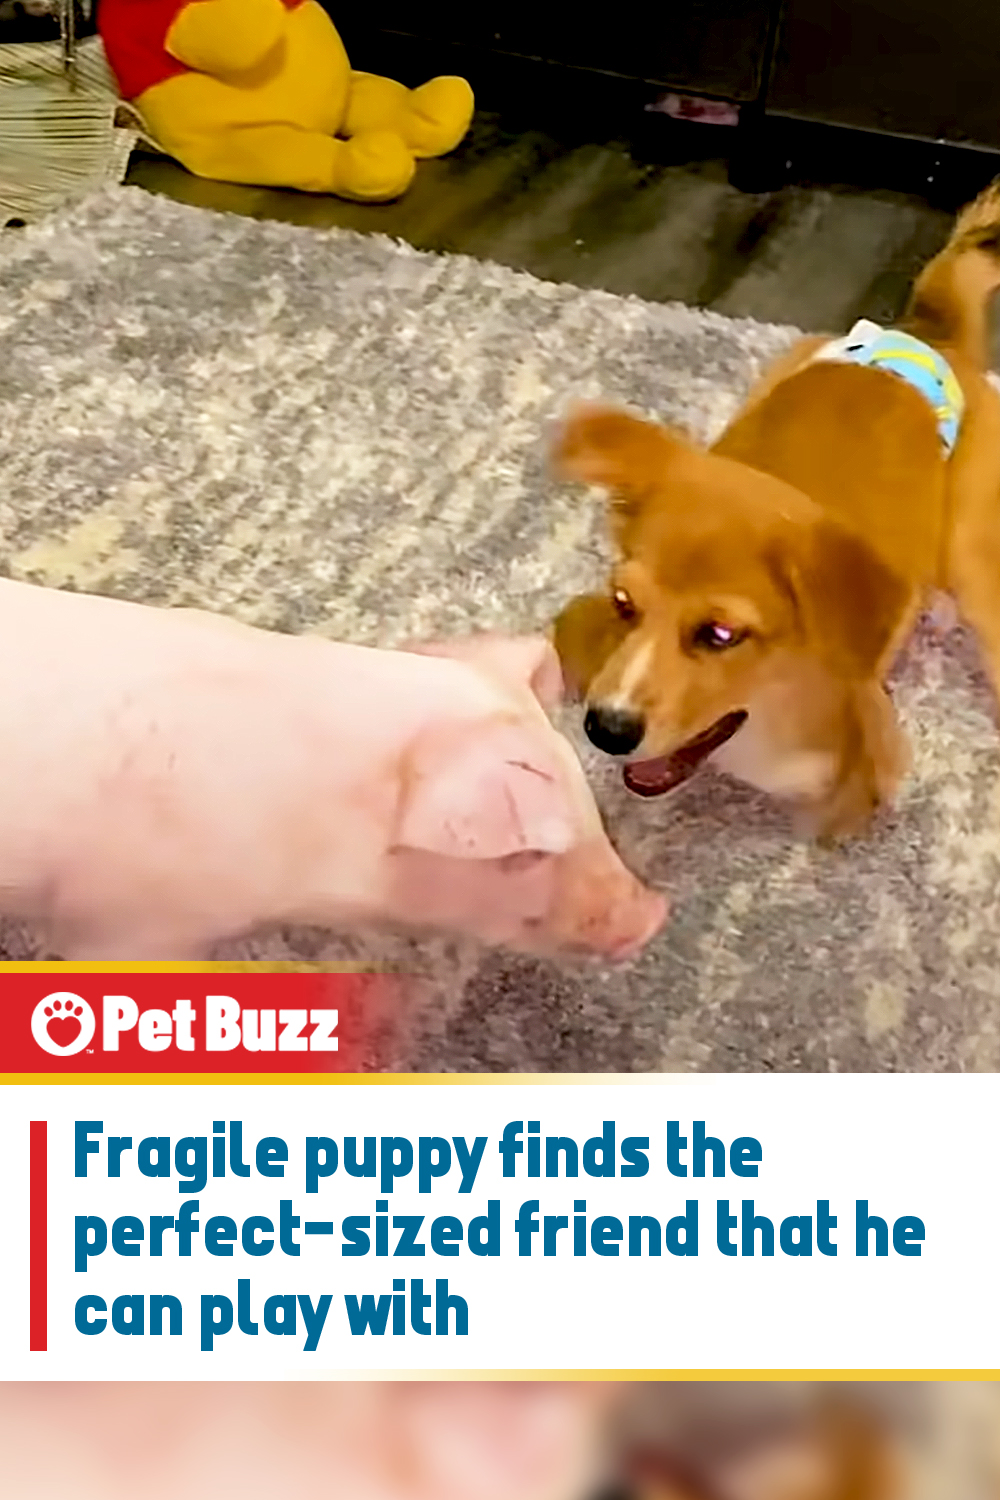 Fragile puppy finds the perfect-sized friend that he can play with